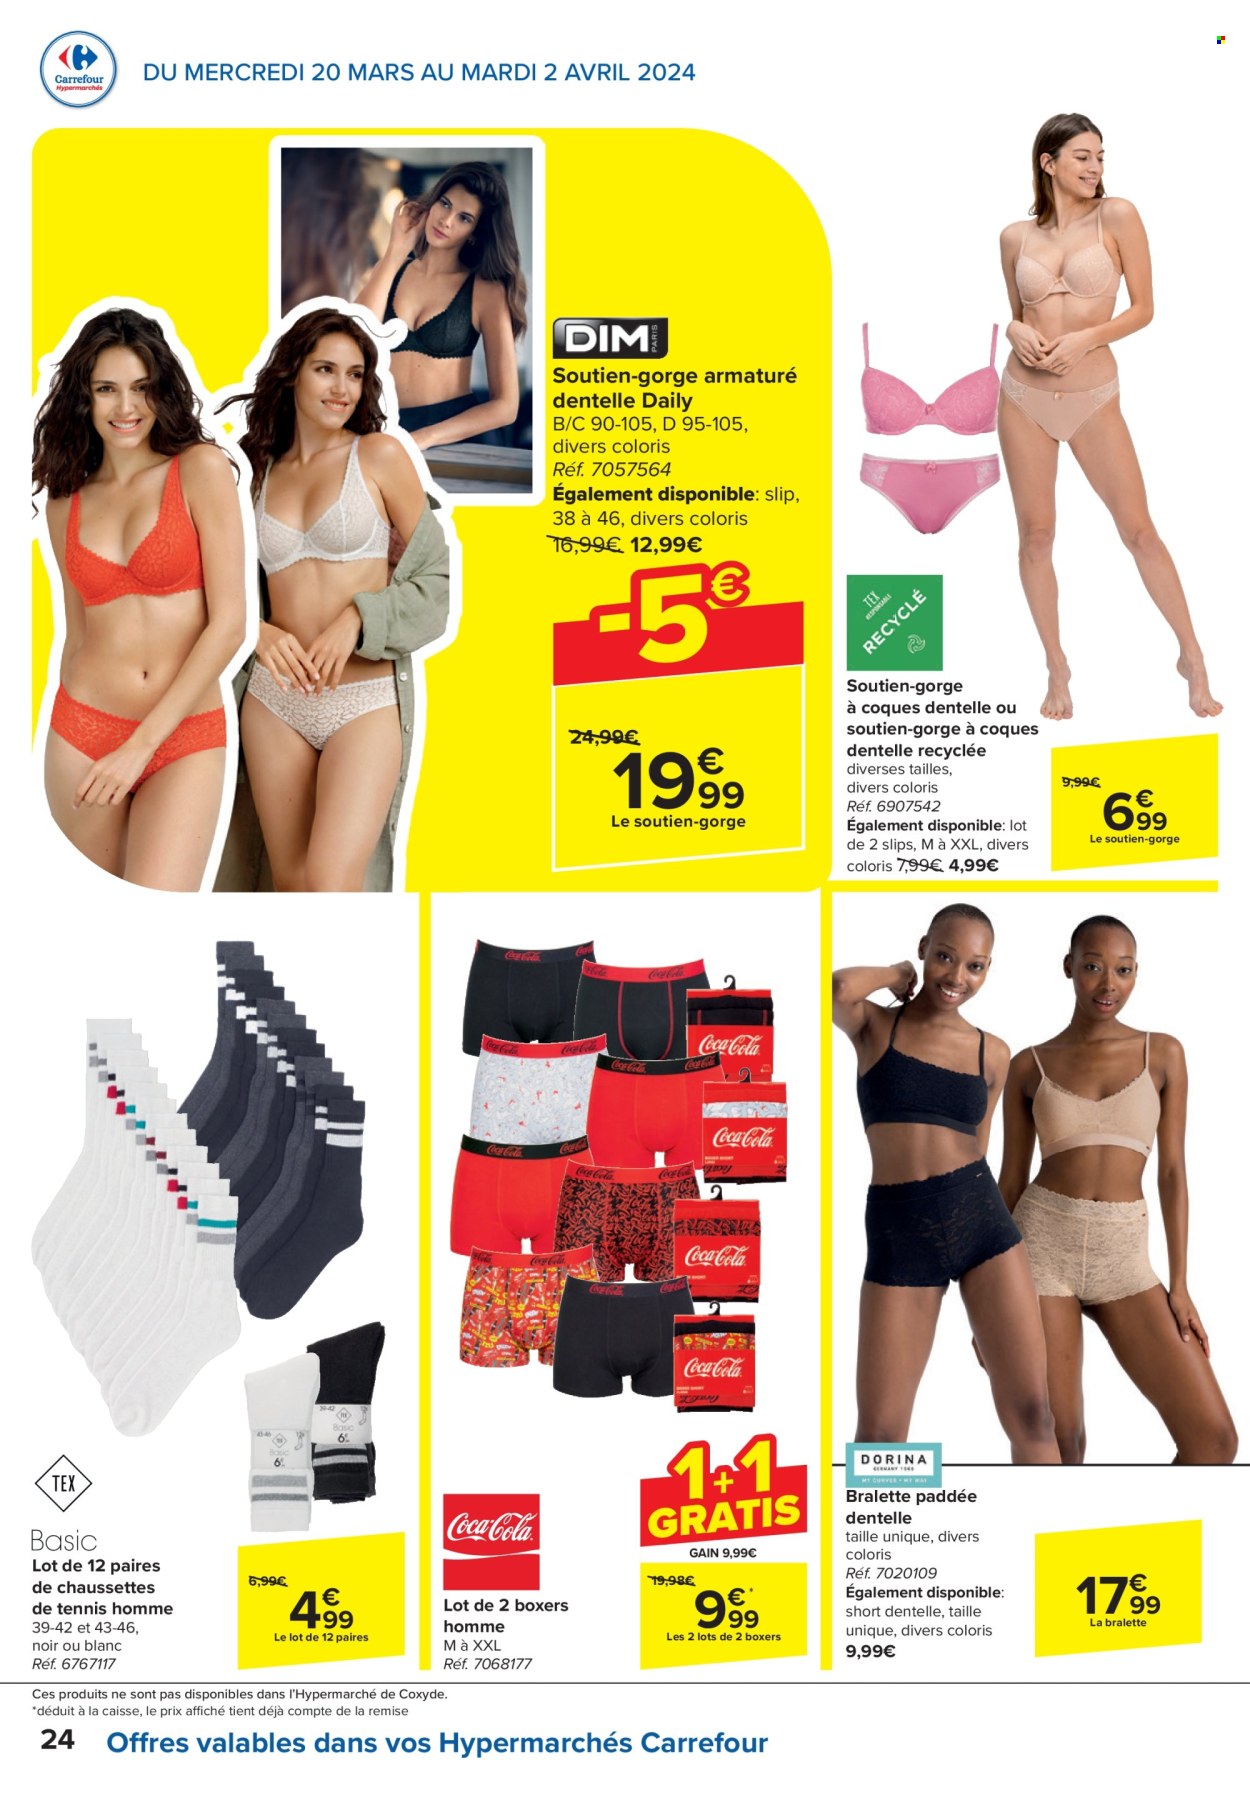 Catalogue Carrefour hypermarkt - 20.3.2024 - 2.4.2024. Page 24.